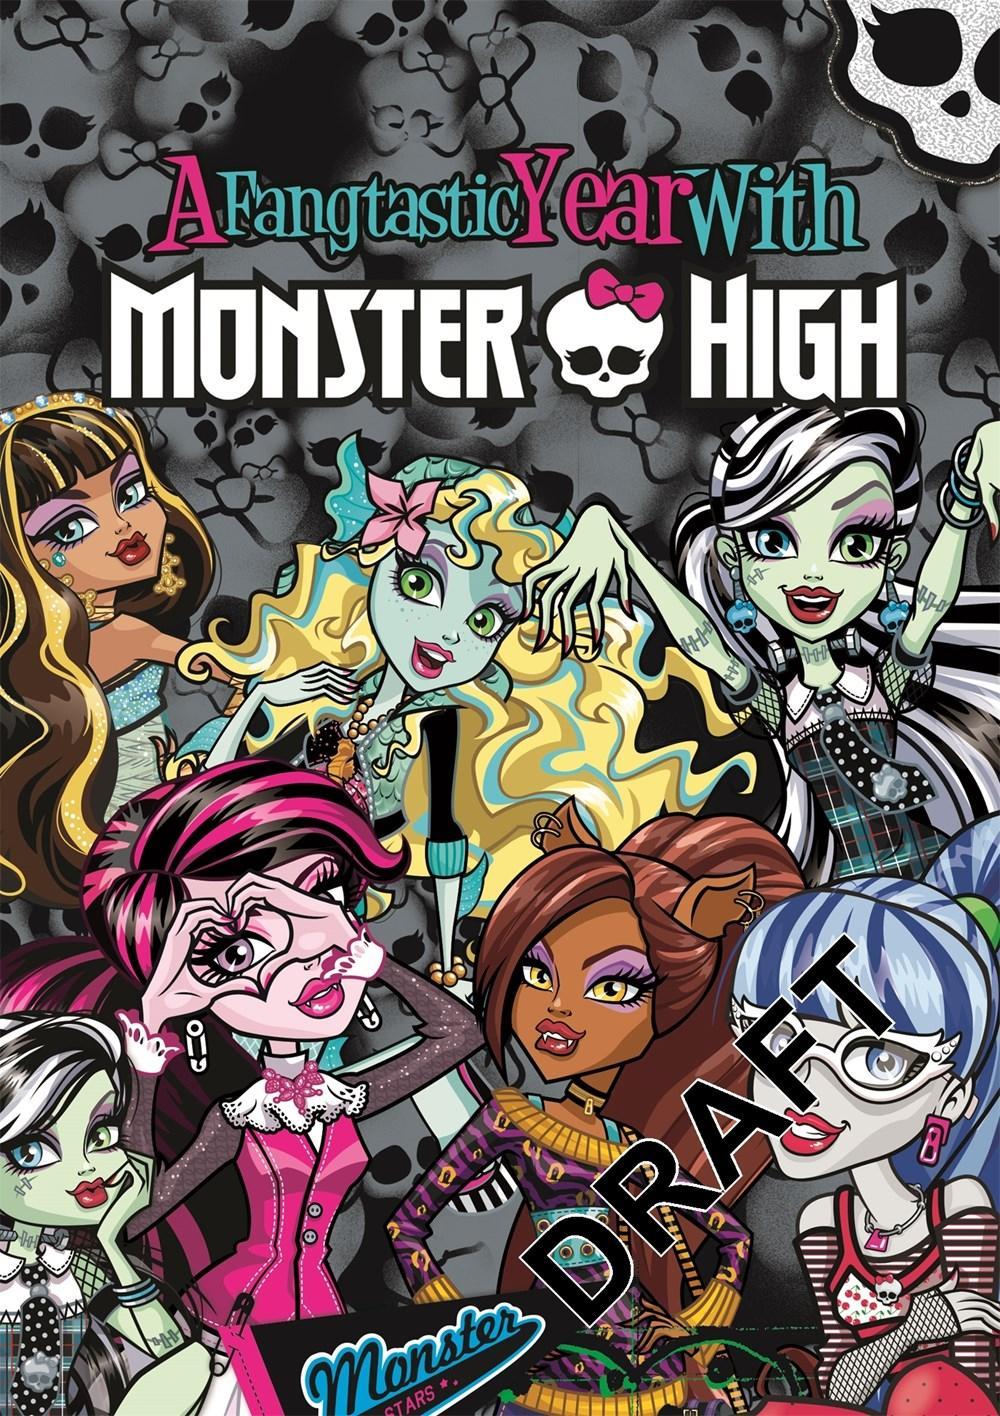 EDDA USA MAY 2017 A Fangtastic Year With Monster High A novelty calendar diary with a folded magnet to close.